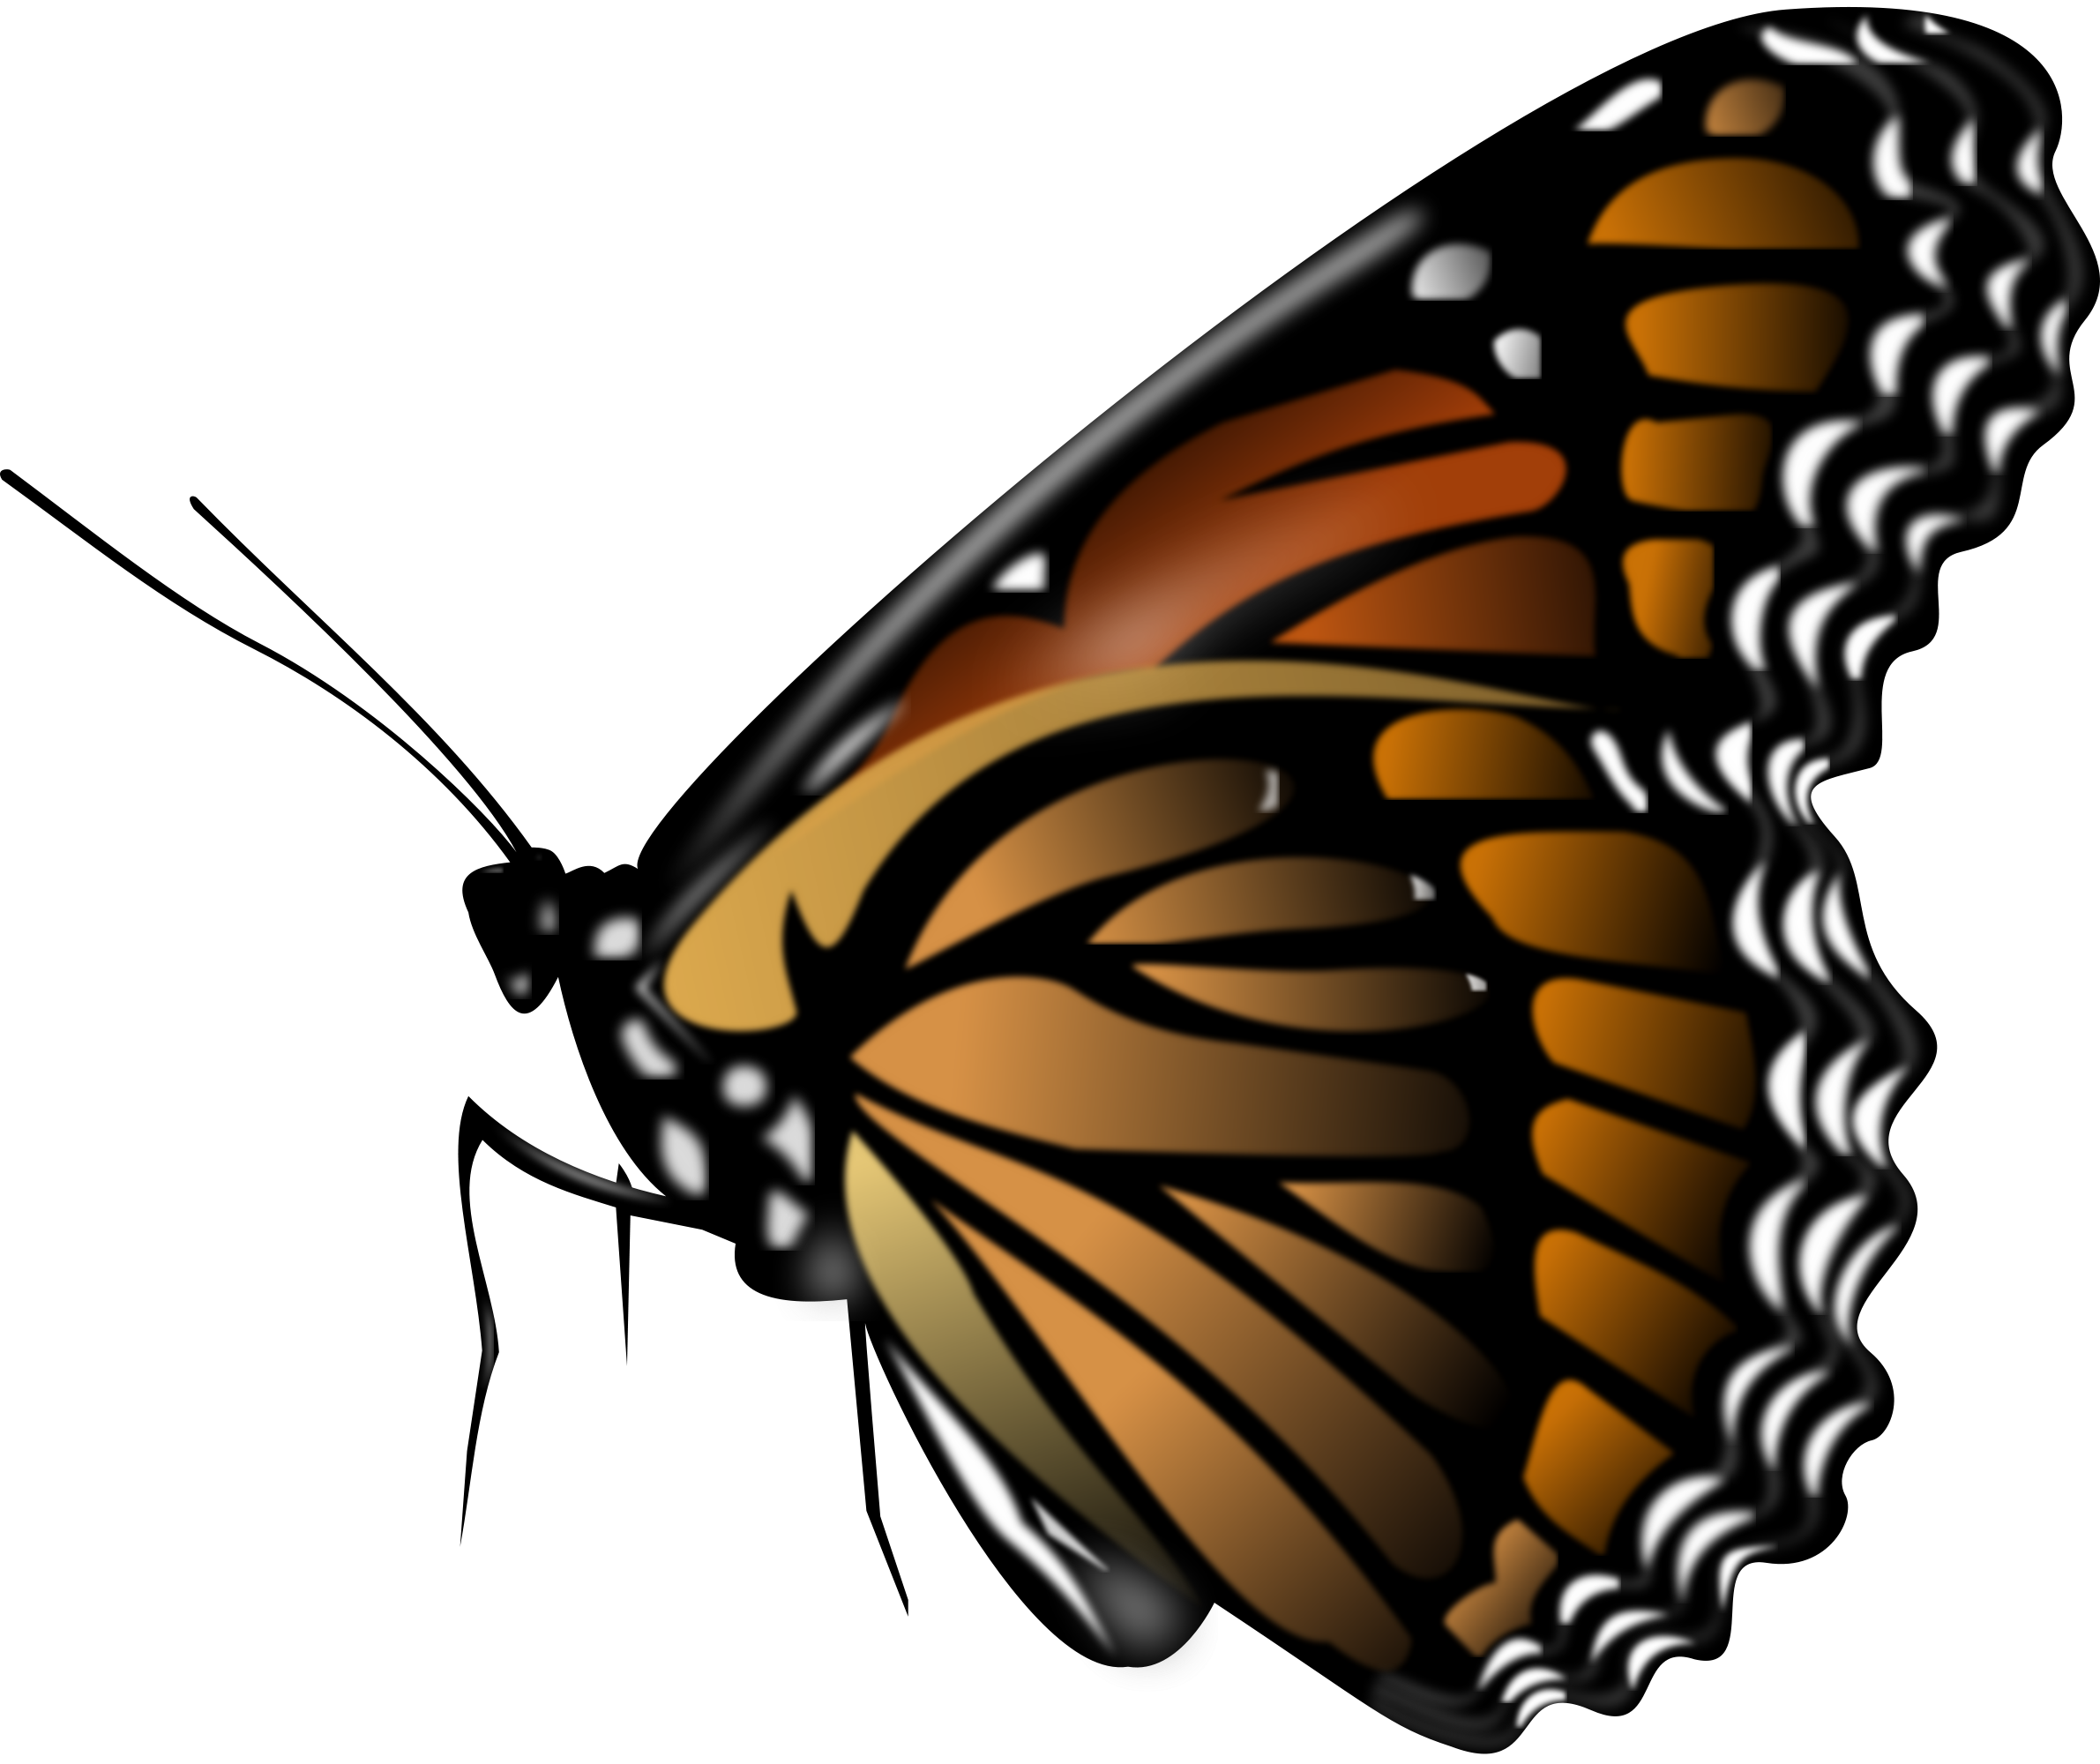 Download PNG image: Butterfly PNG image